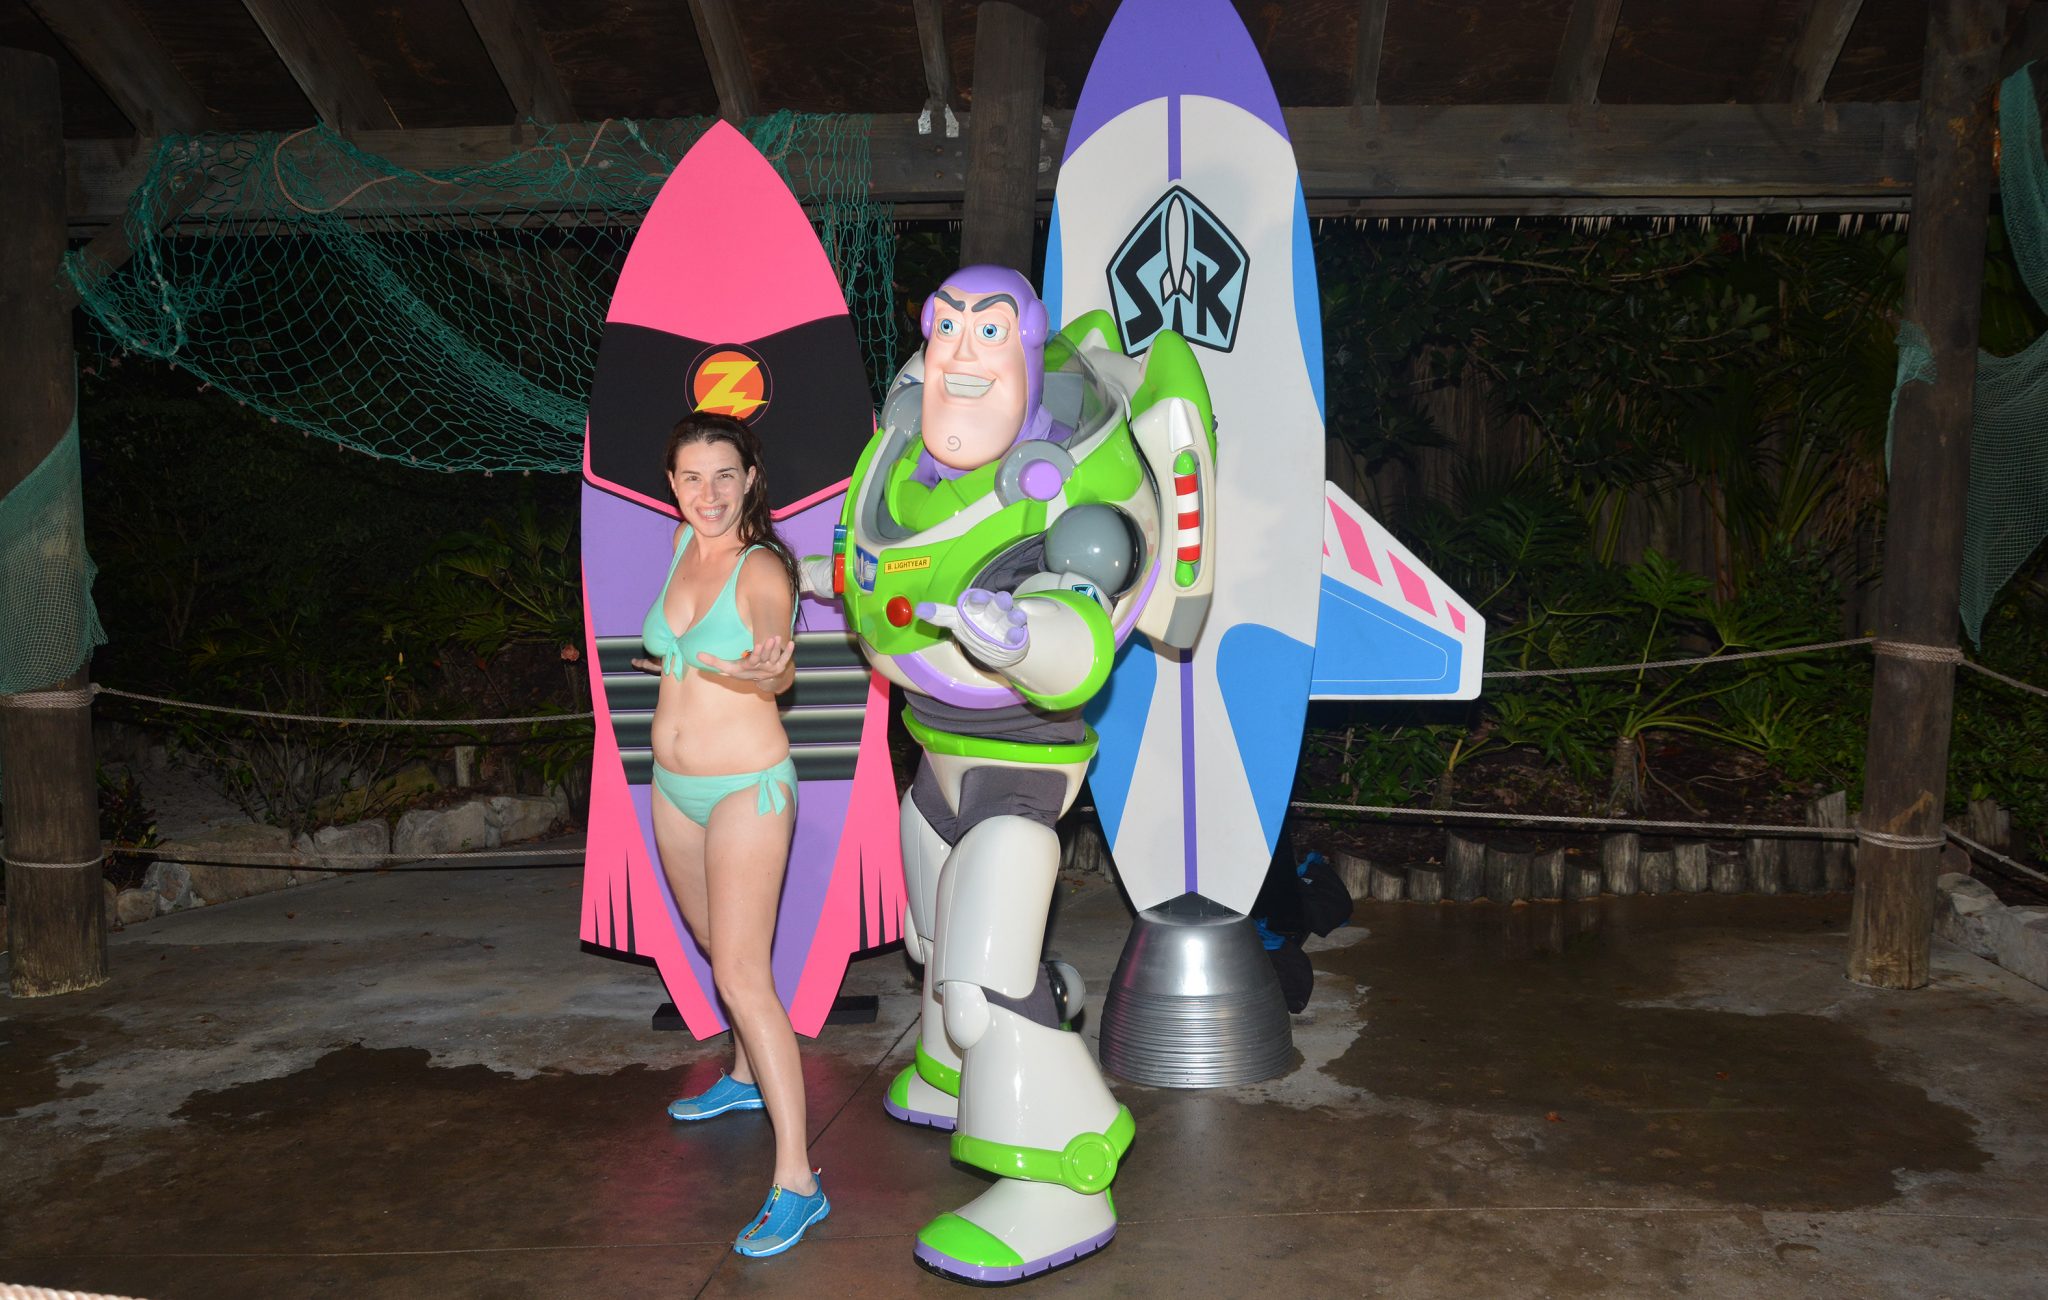 Chelsea "surfing" with Buzz during H2O Glow Nights.